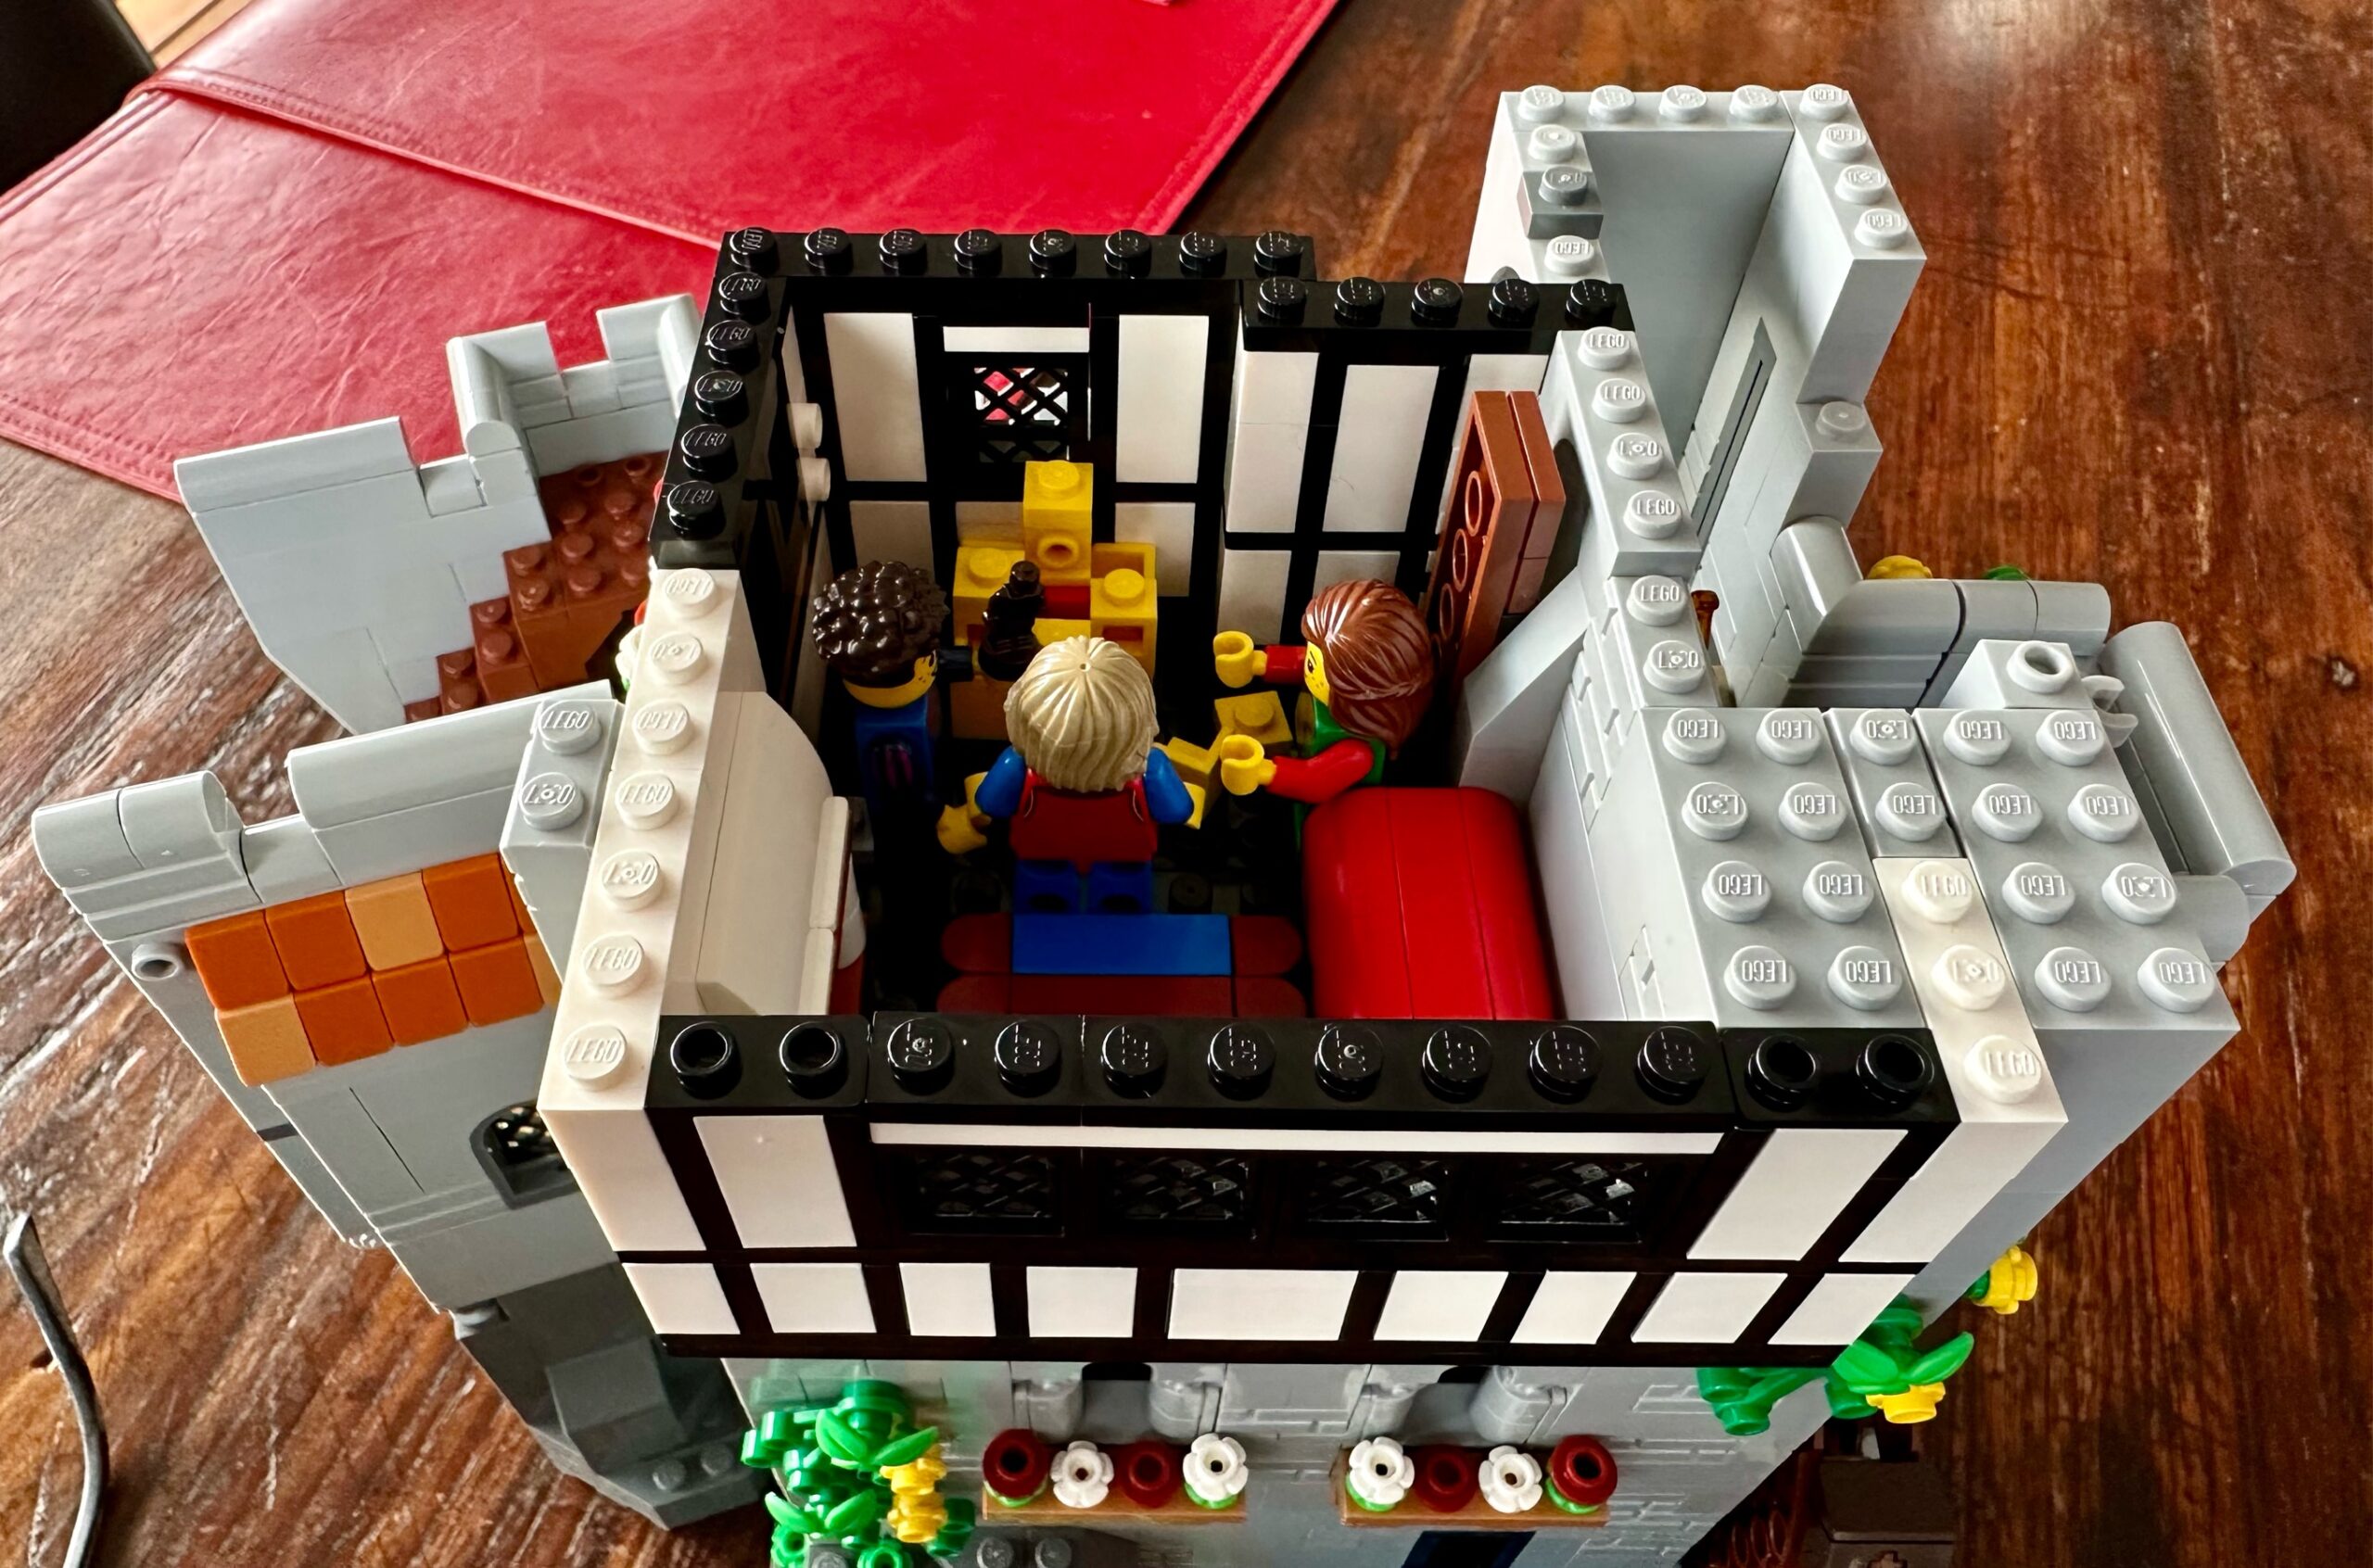 Top down view of LEGO castle in closed position to form a complete child's bedroom or playroom. Two young children play with toys while the frightened squire stands over them.